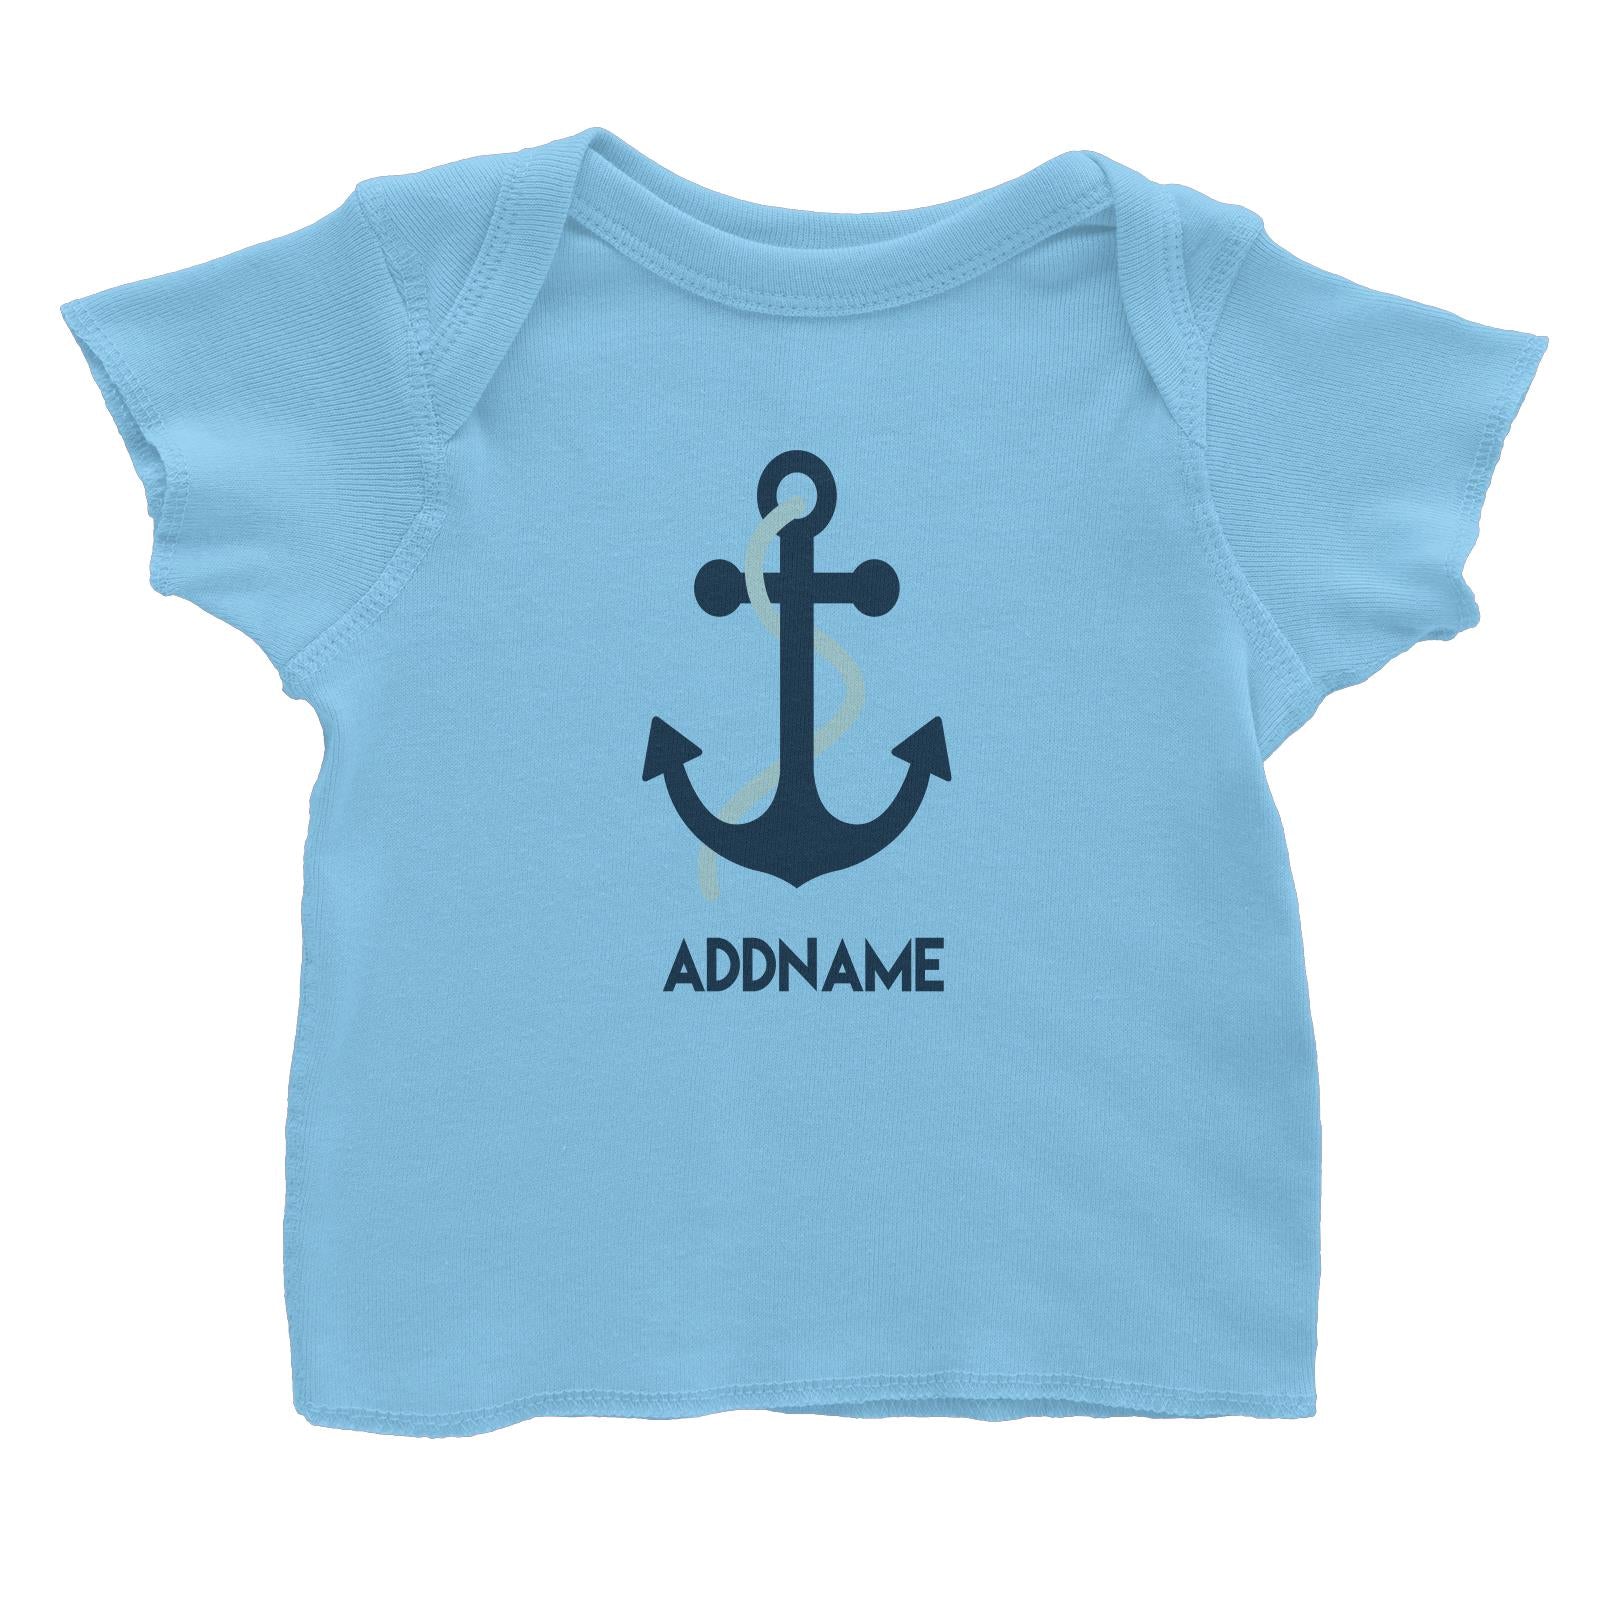 Sailor Anchor Blue Addname Baby T-Shirt  Matching Family Personalizable Designs